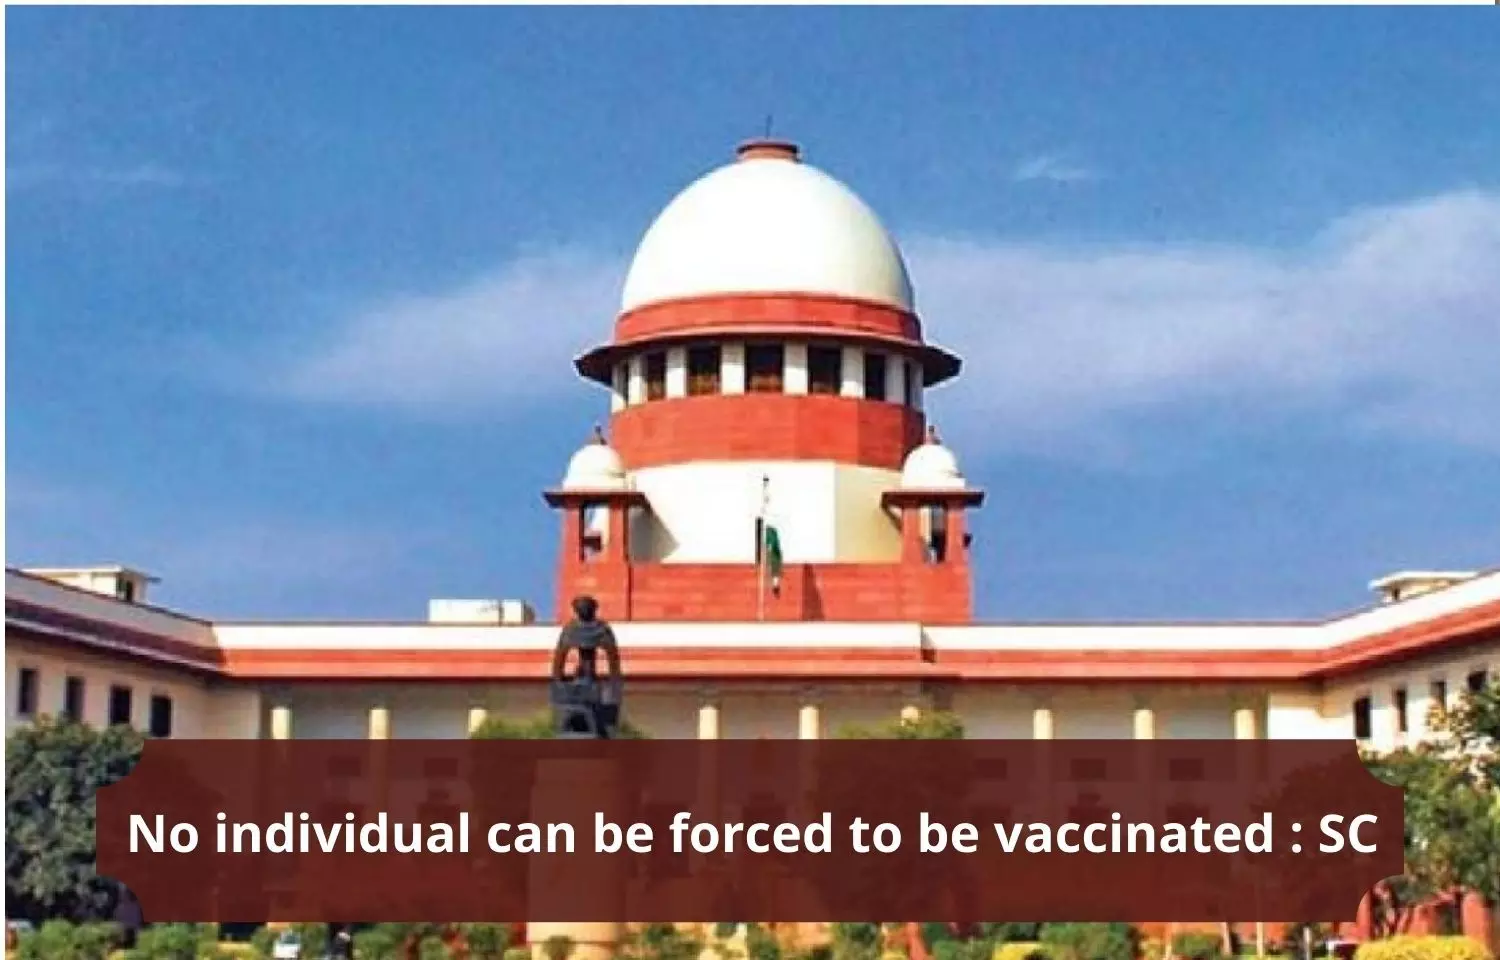 SC says no individual can be forced to be vaccinated